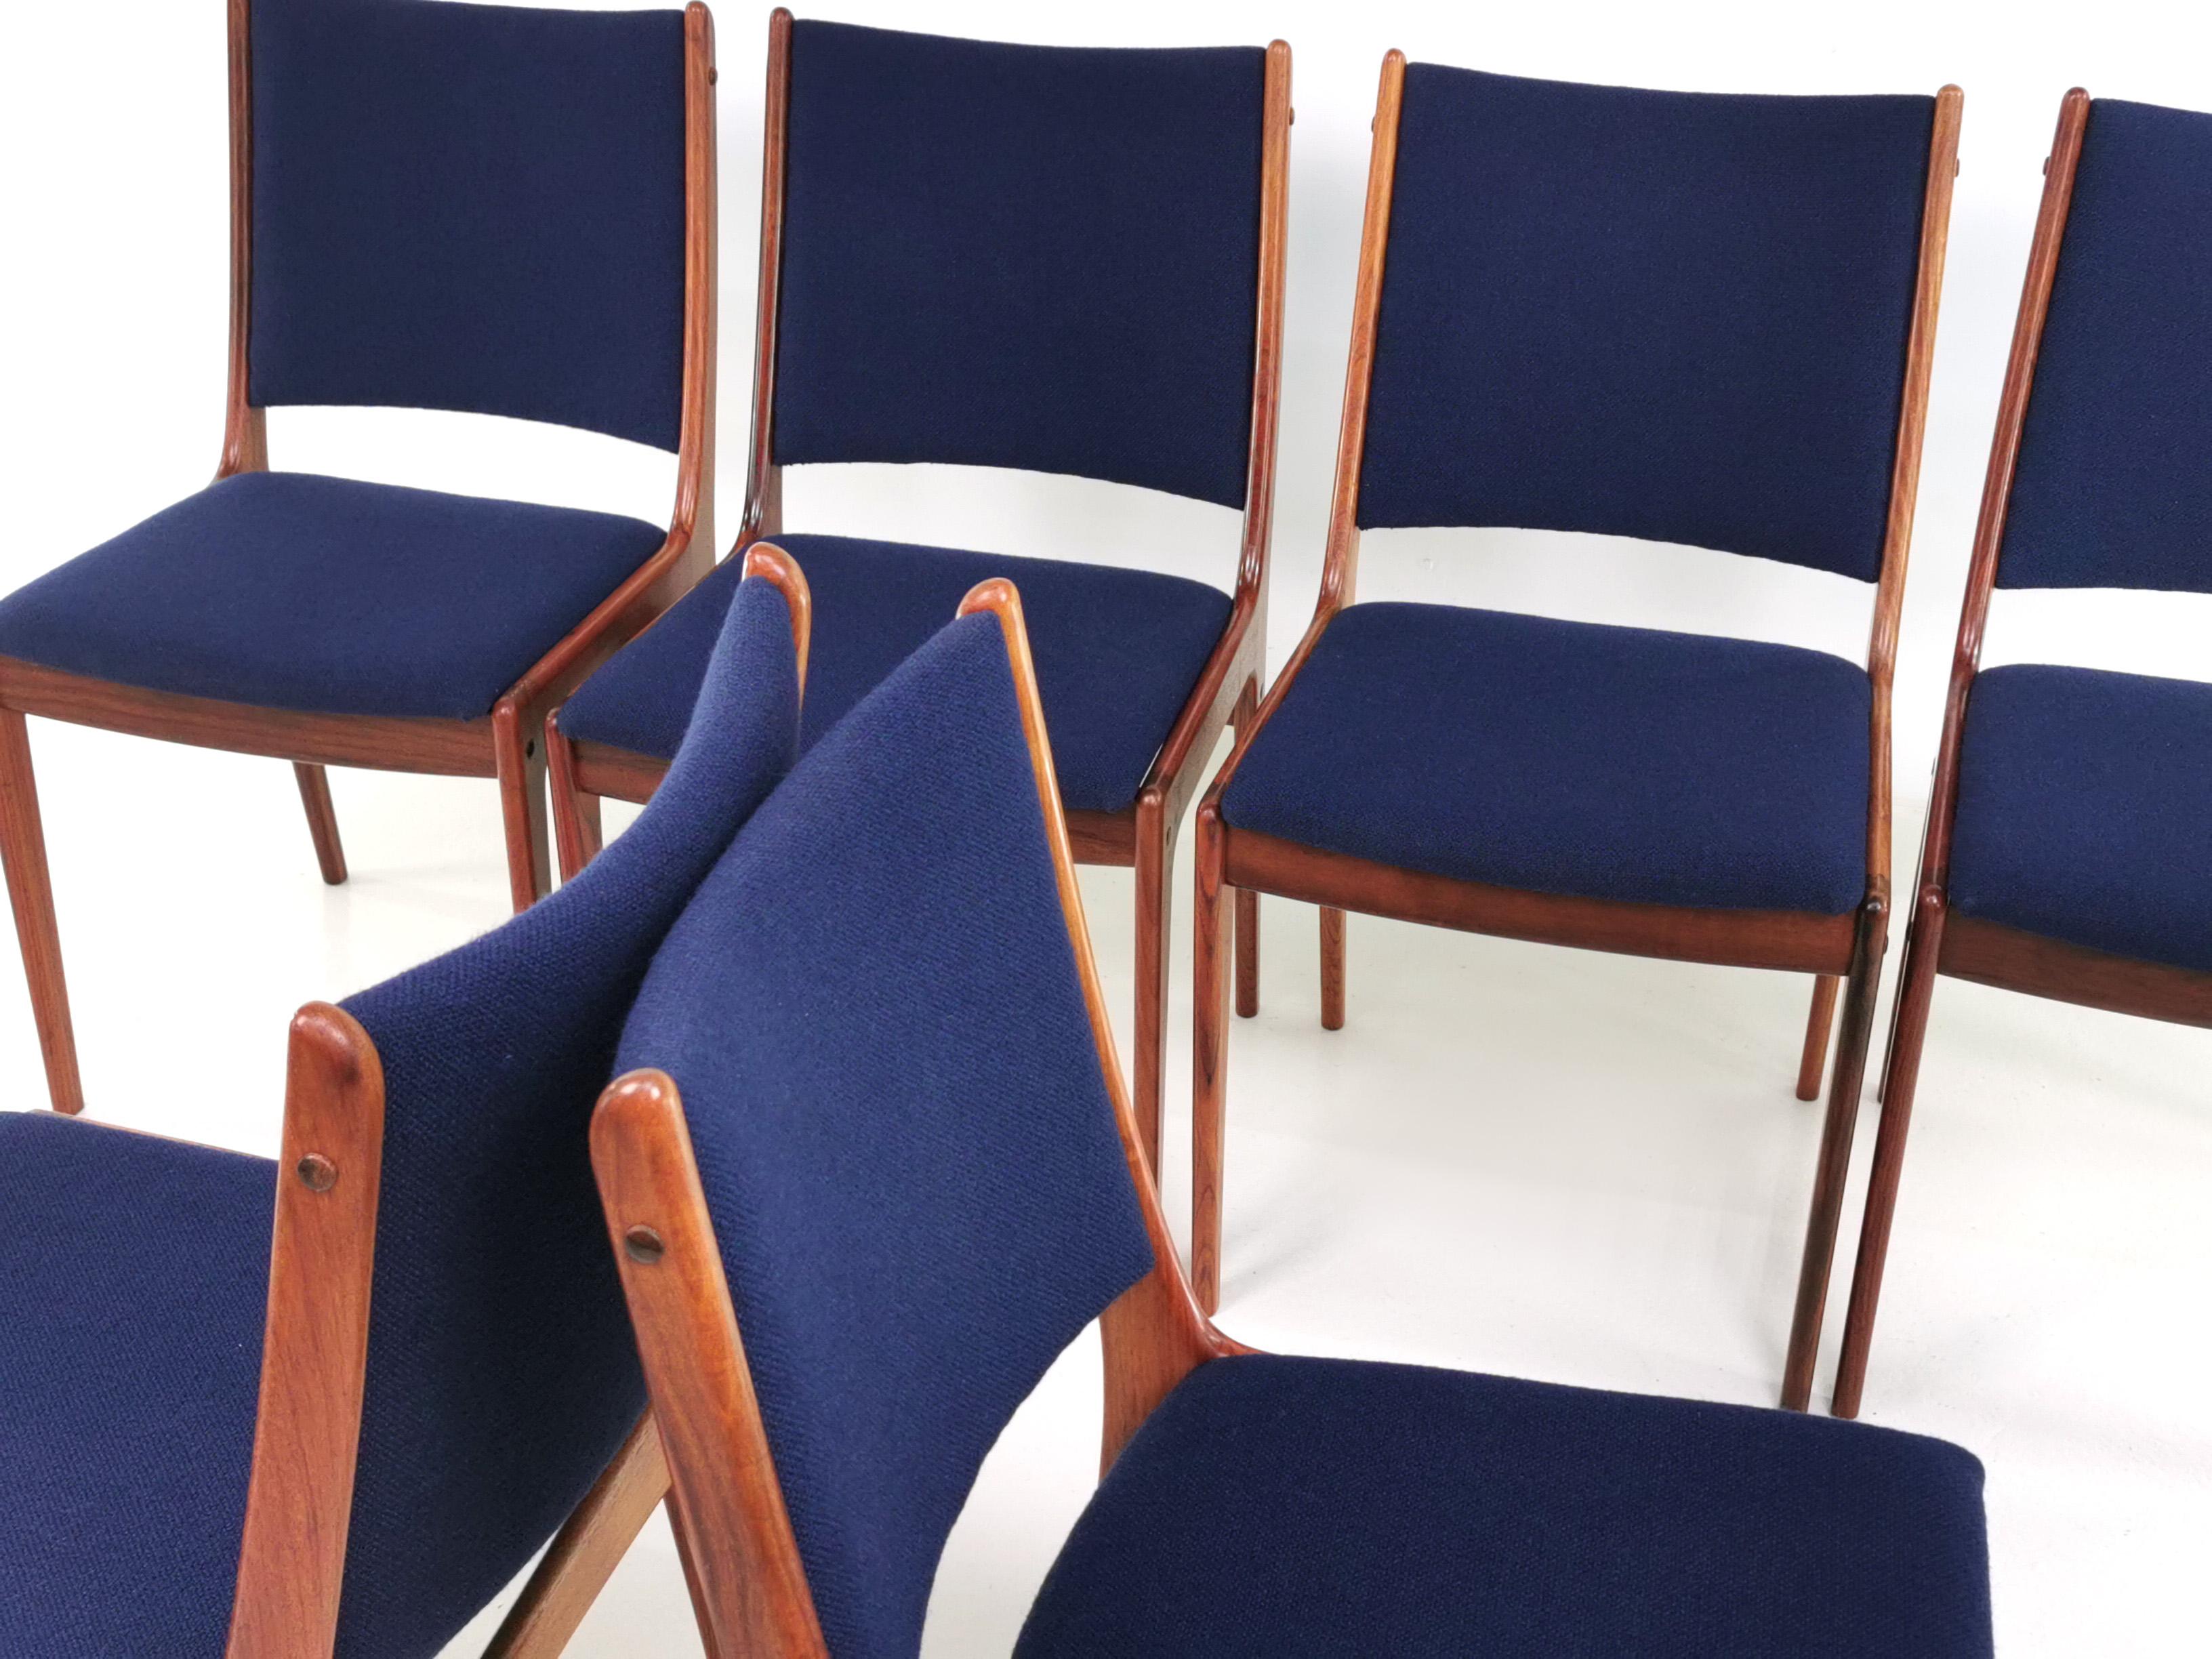 Johannes Andersen dining chairs

A set of six Brazilian rosewood dining chairs by Danish designer Johannes Andersen, and produced by Uldum Møbelfabrik in the 1960s. 

New foam and re-upholstered in Hallingdal 65 dark blue high quality wool